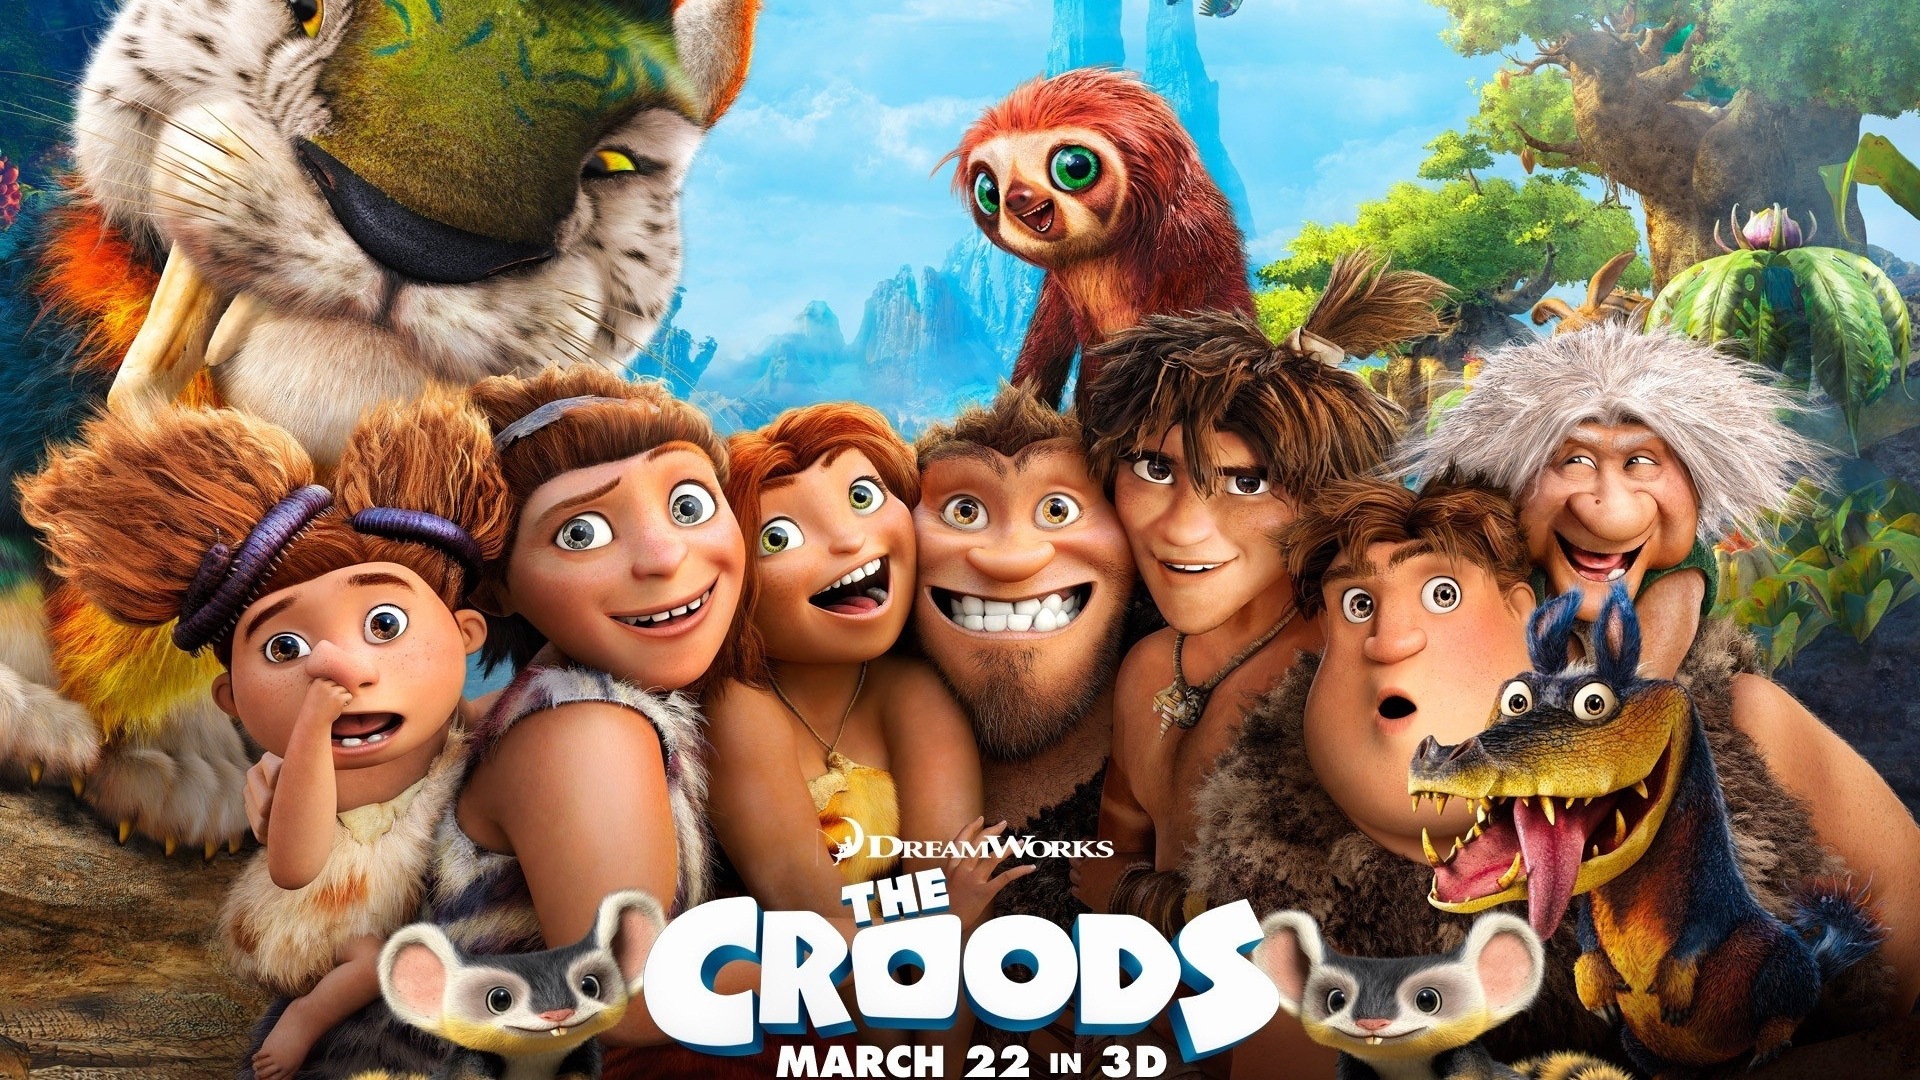 The Croods HD movie wallpapers #1 - 1920x1080